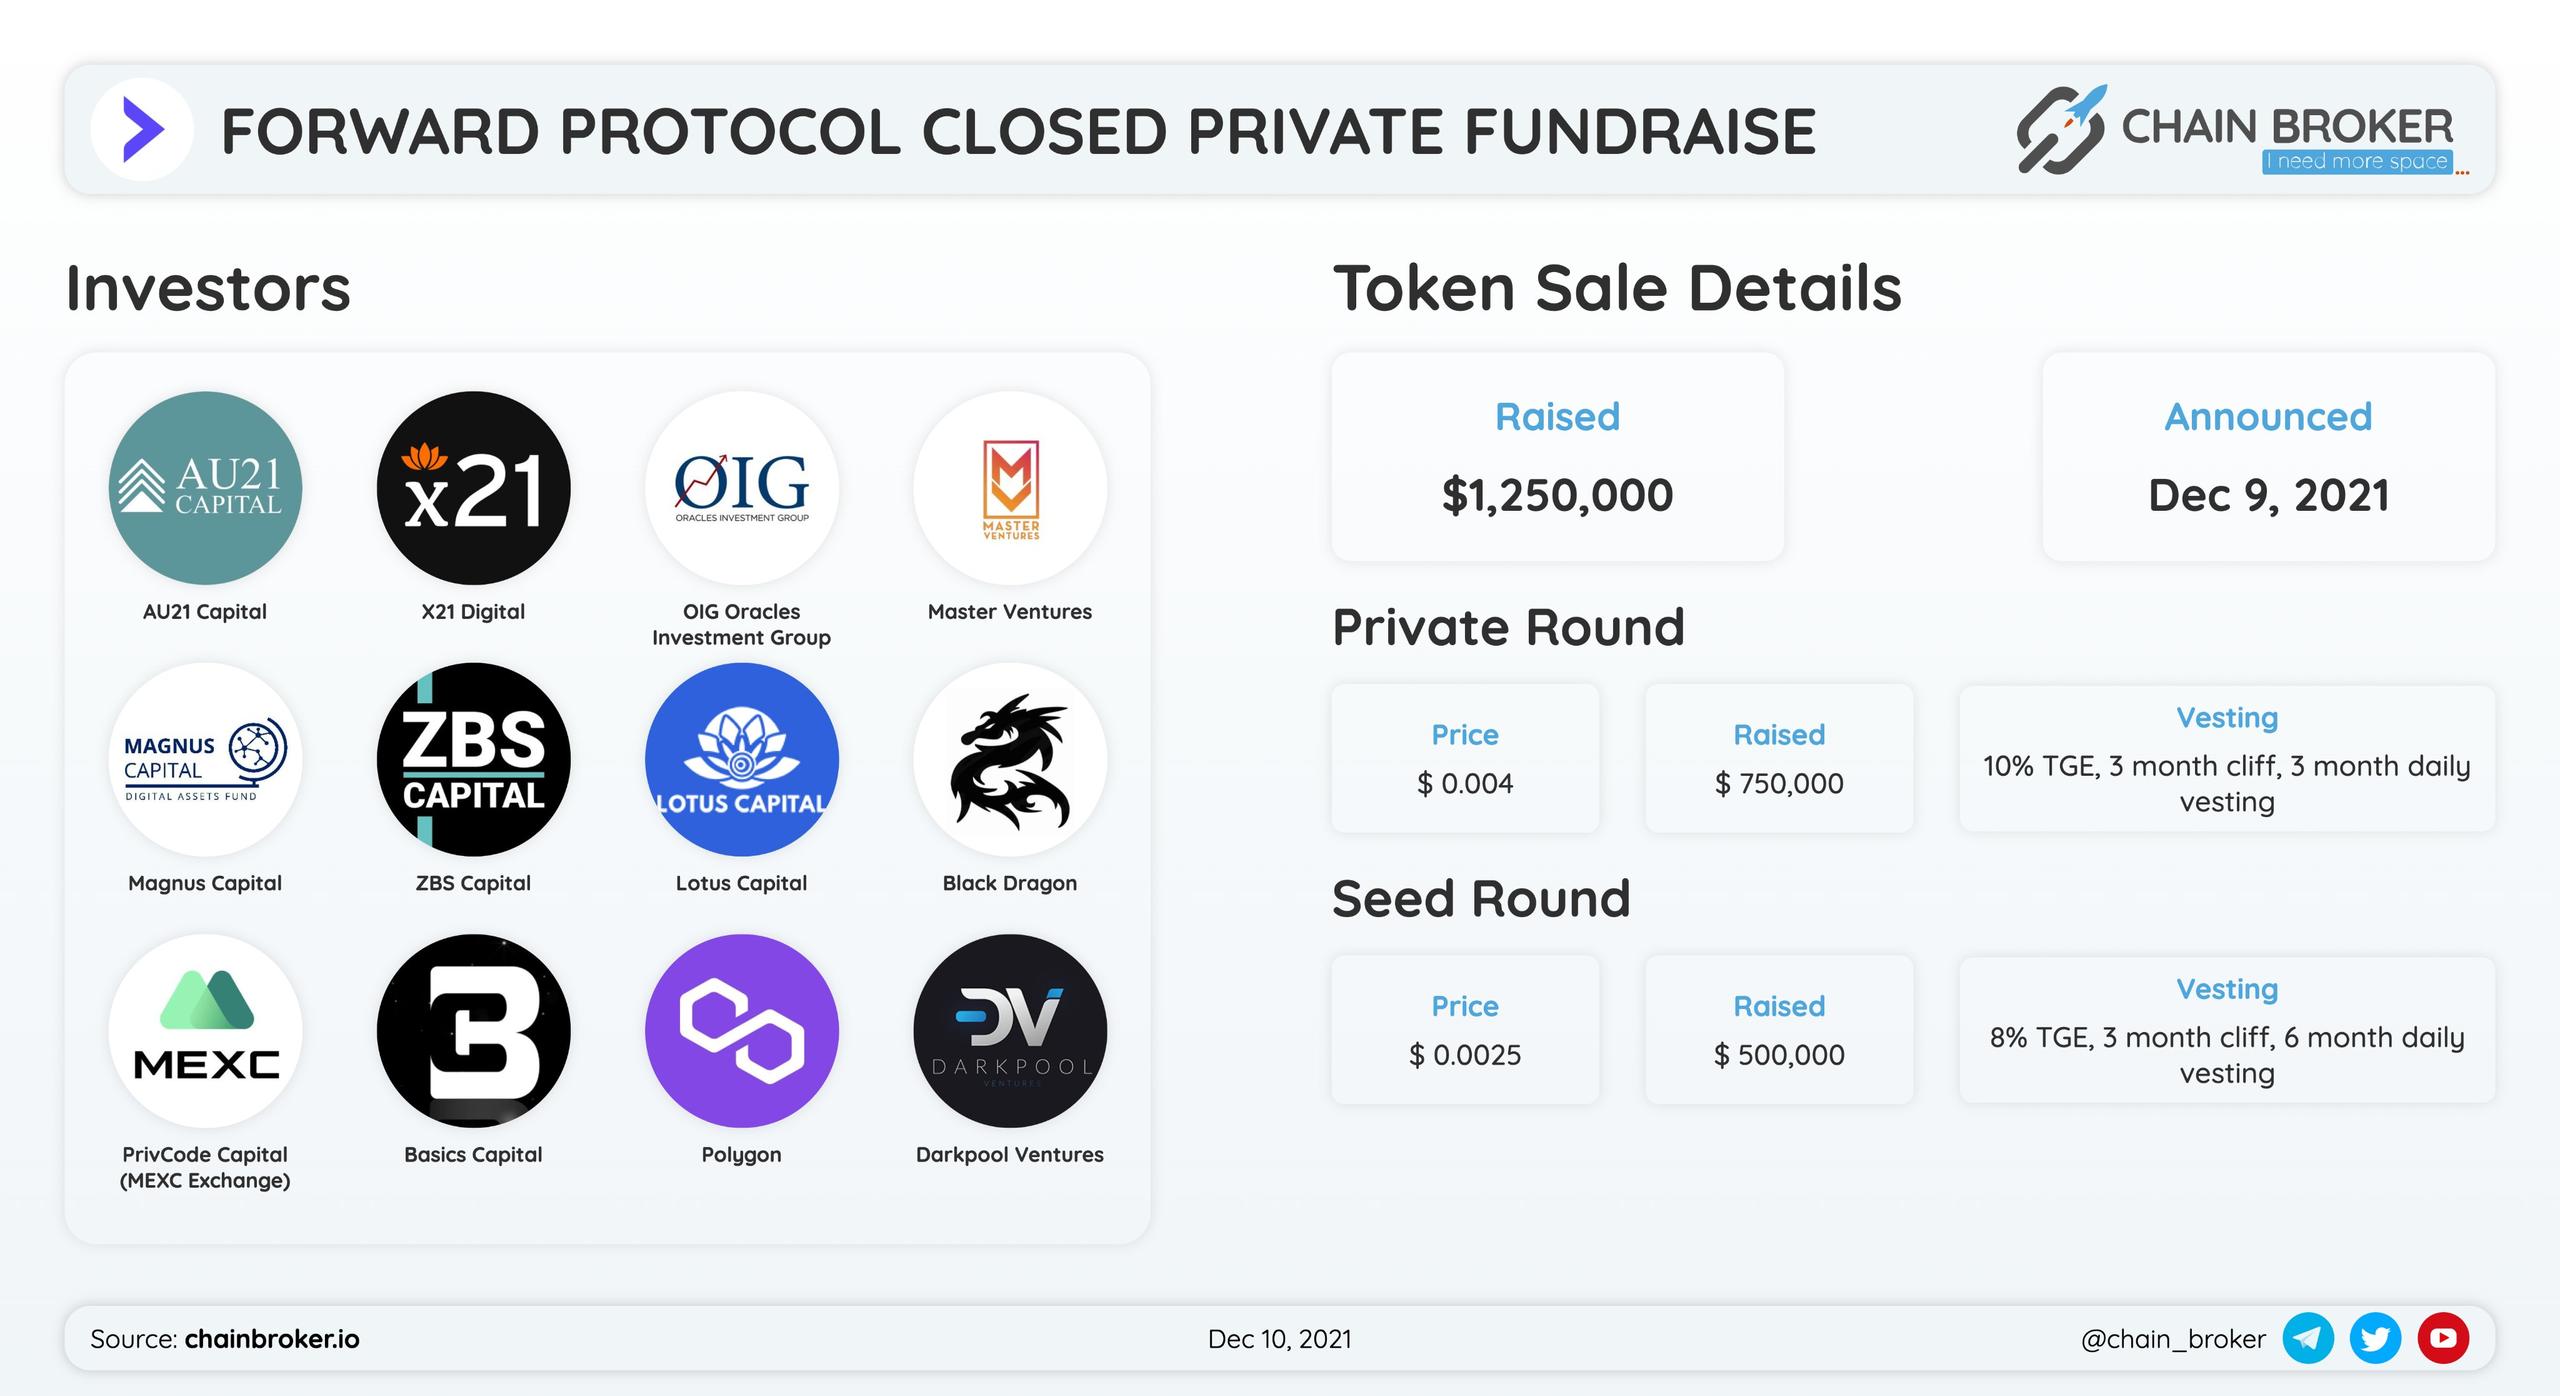 Forward Protocol has closed $1.2M Seed/Private Round.